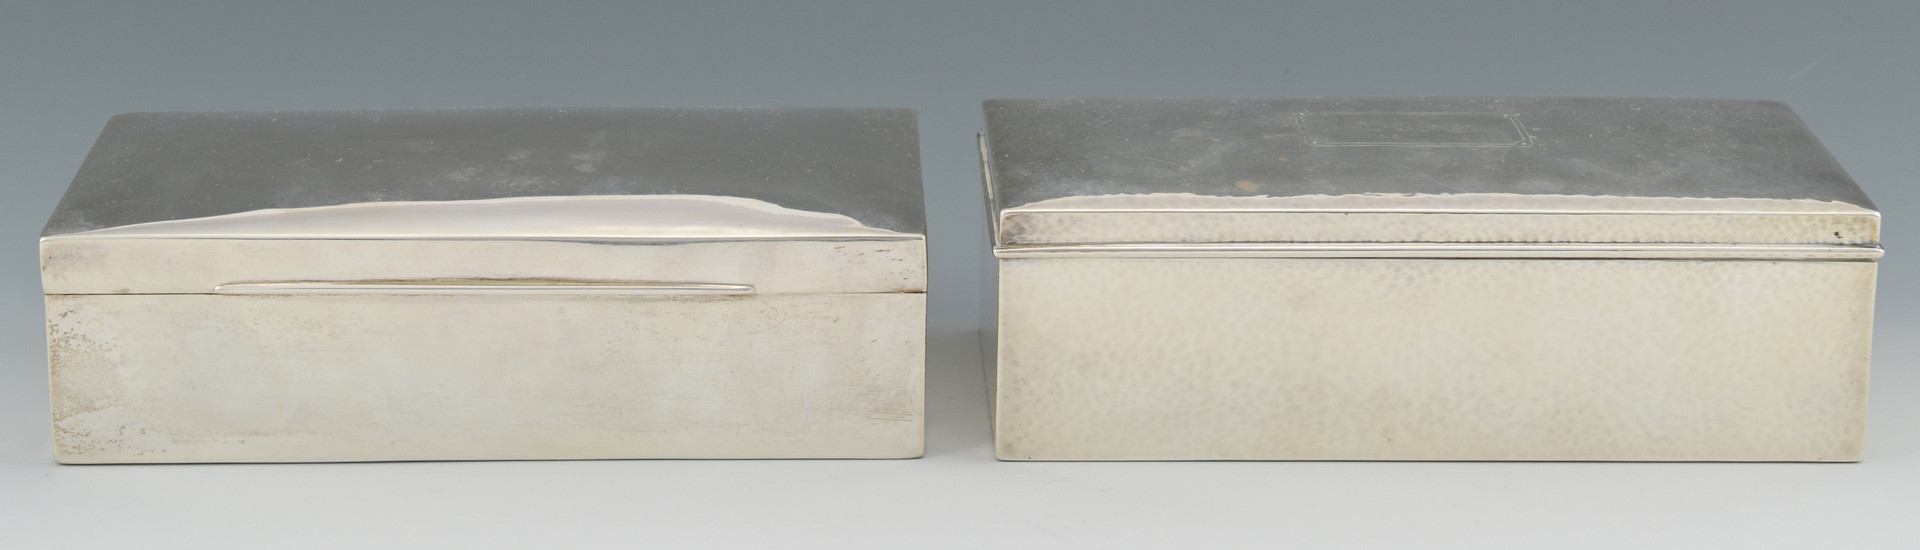 Lot 792: 2 Sterling Silver Boxes